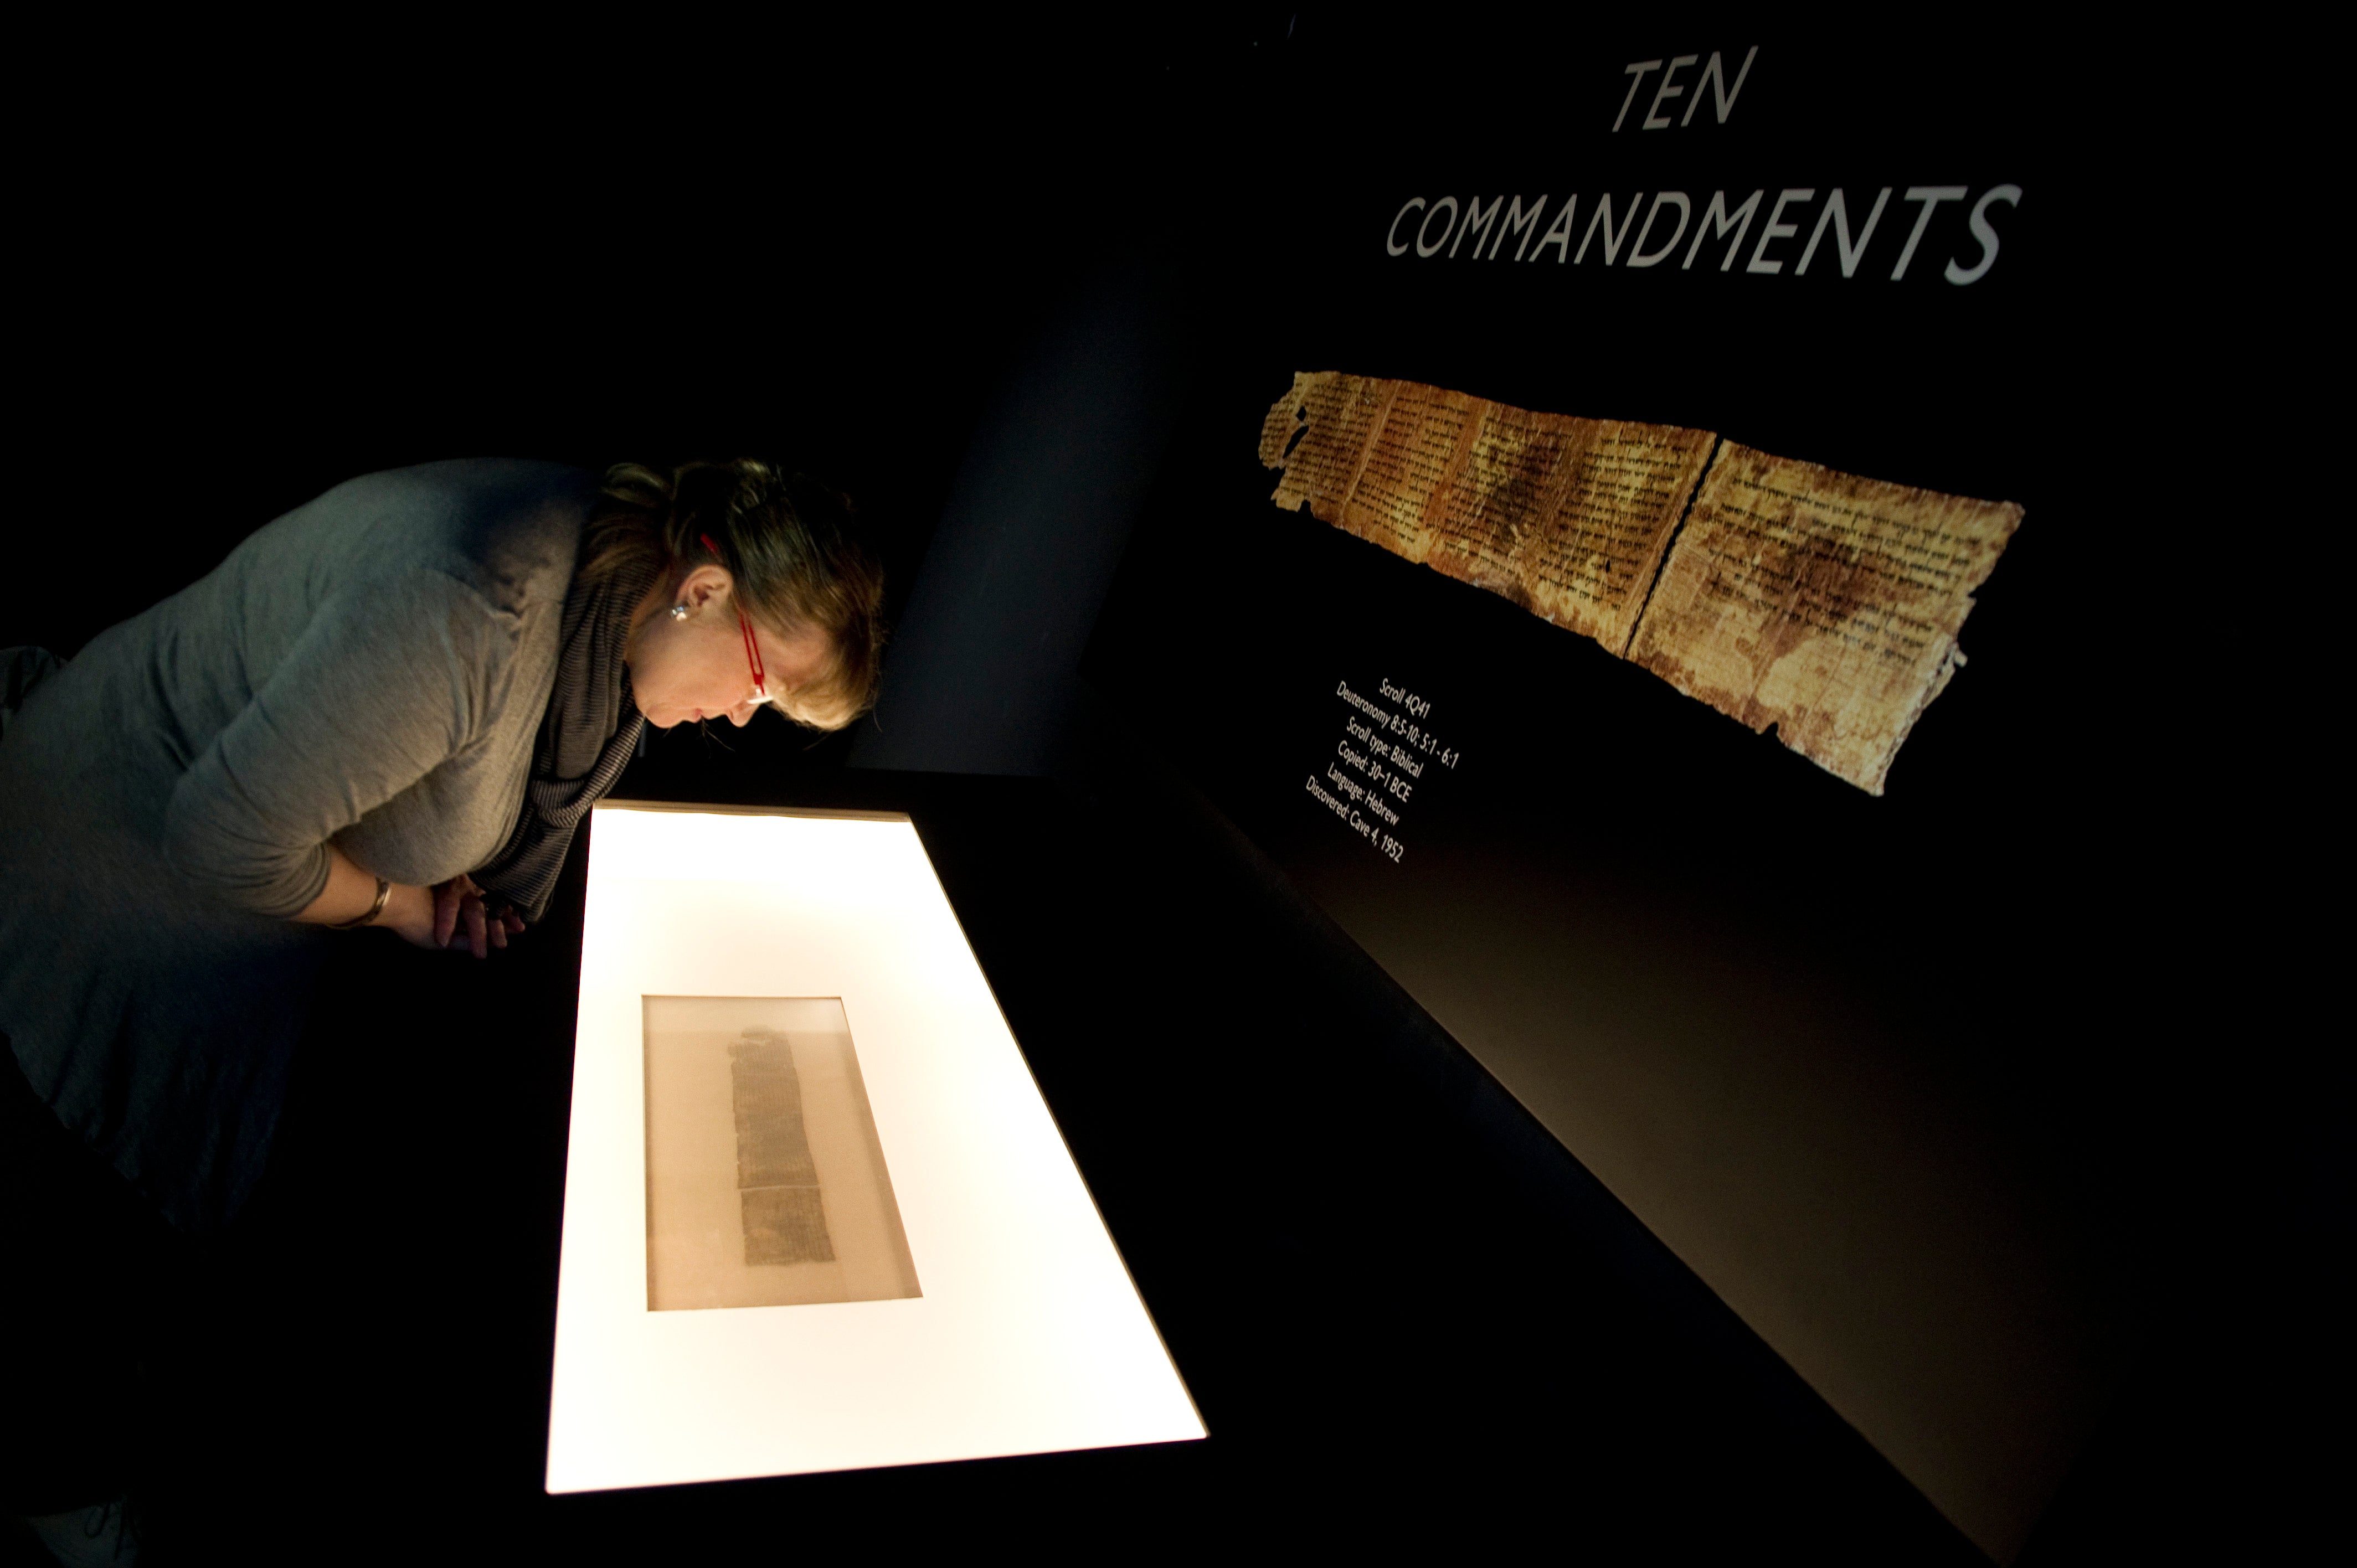 The Ten Commandments Scroll on show in New York ten years ago